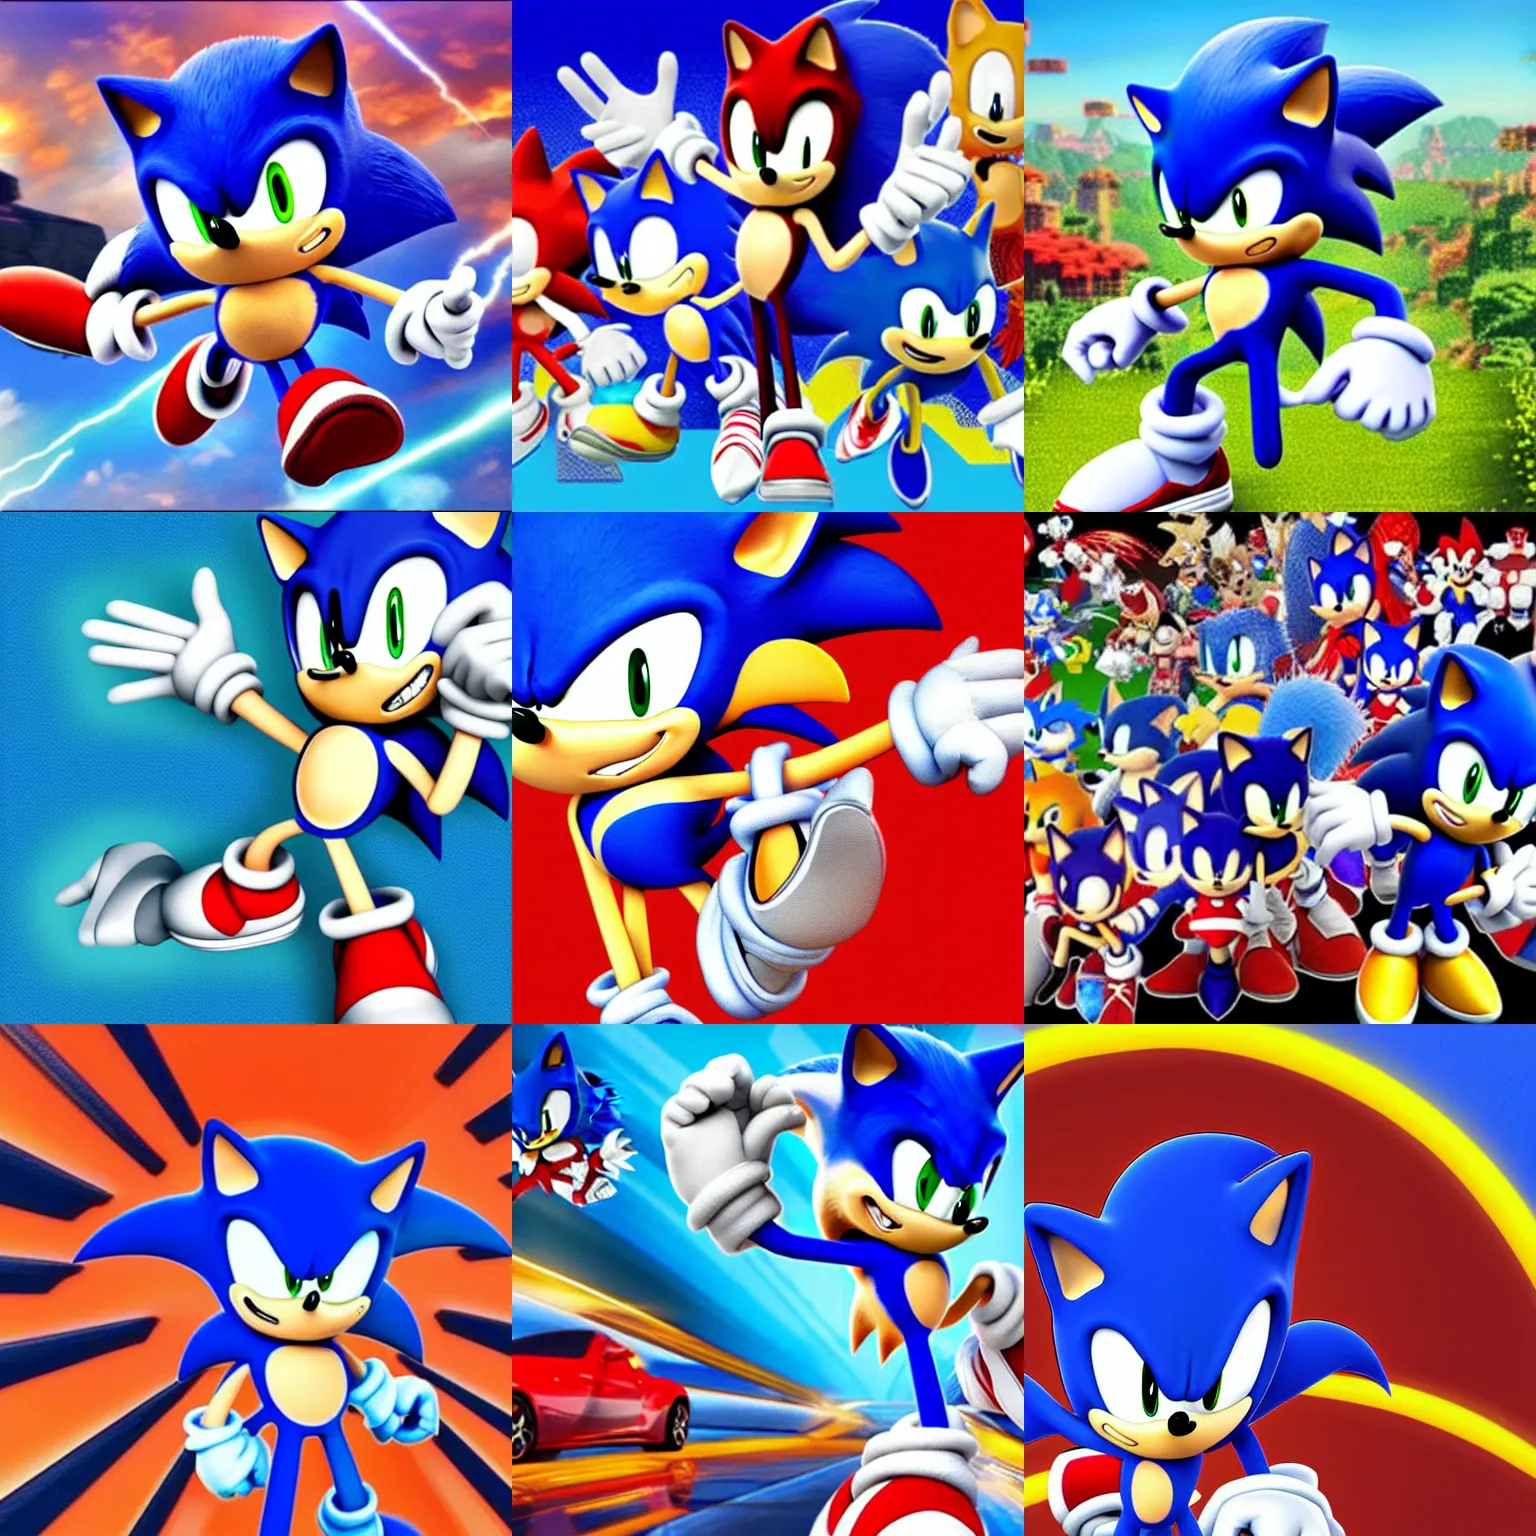 Prompt: sonic the hedgehog filling the whole image, the entire image is filled with sonic